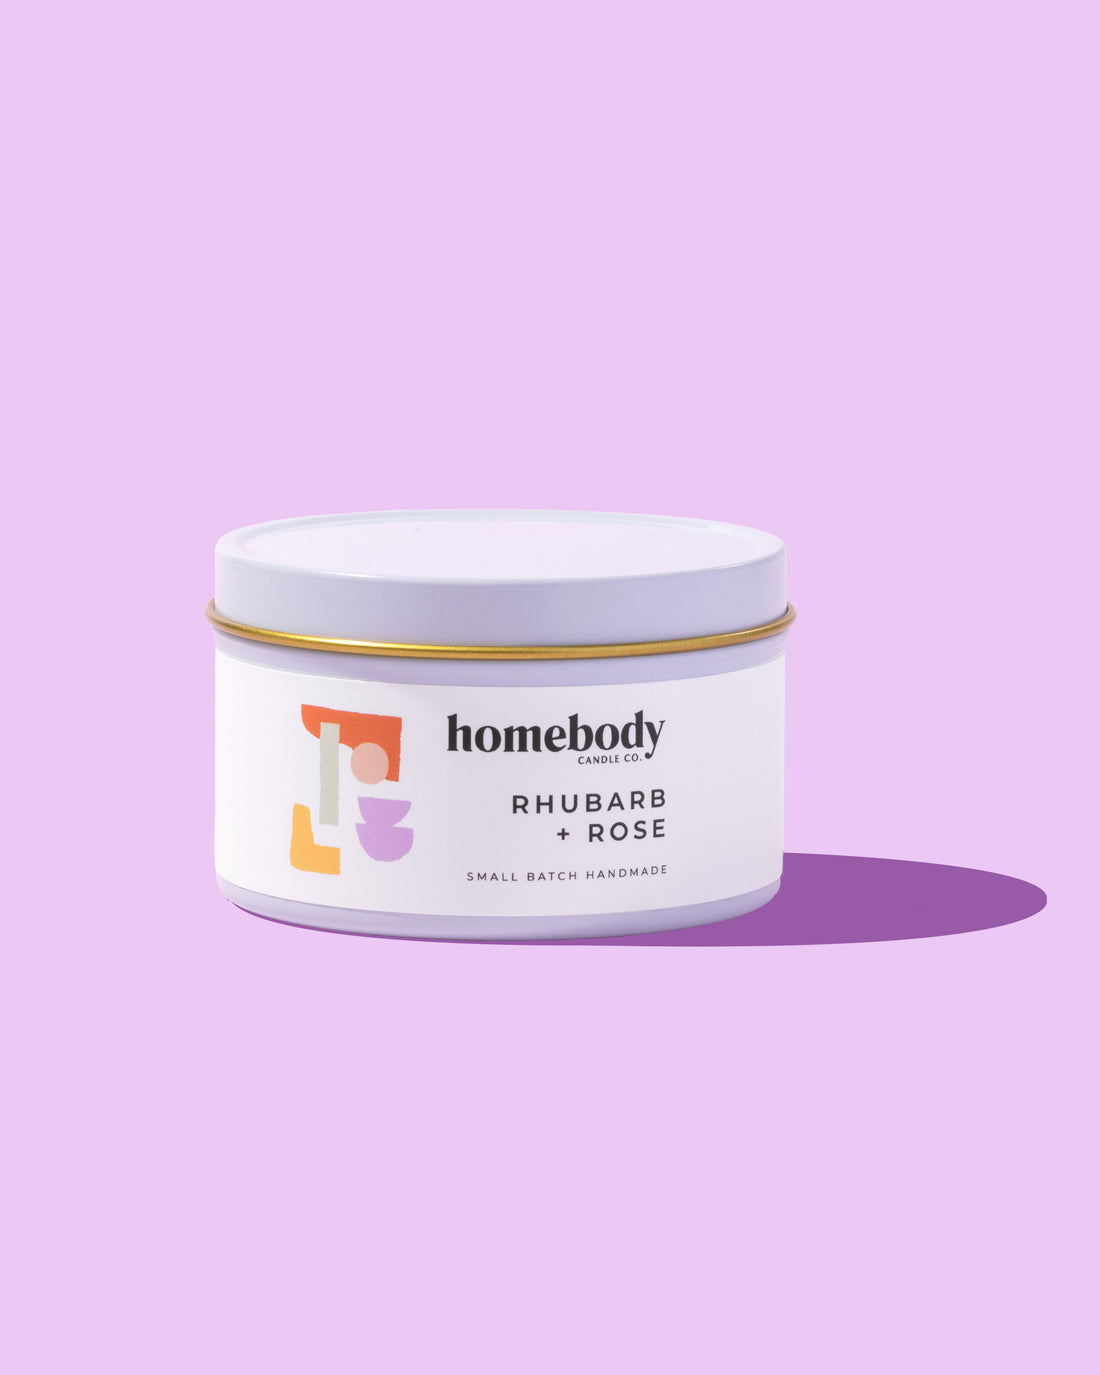 Rhubarb + Rose candle tin Homebody Candle Co